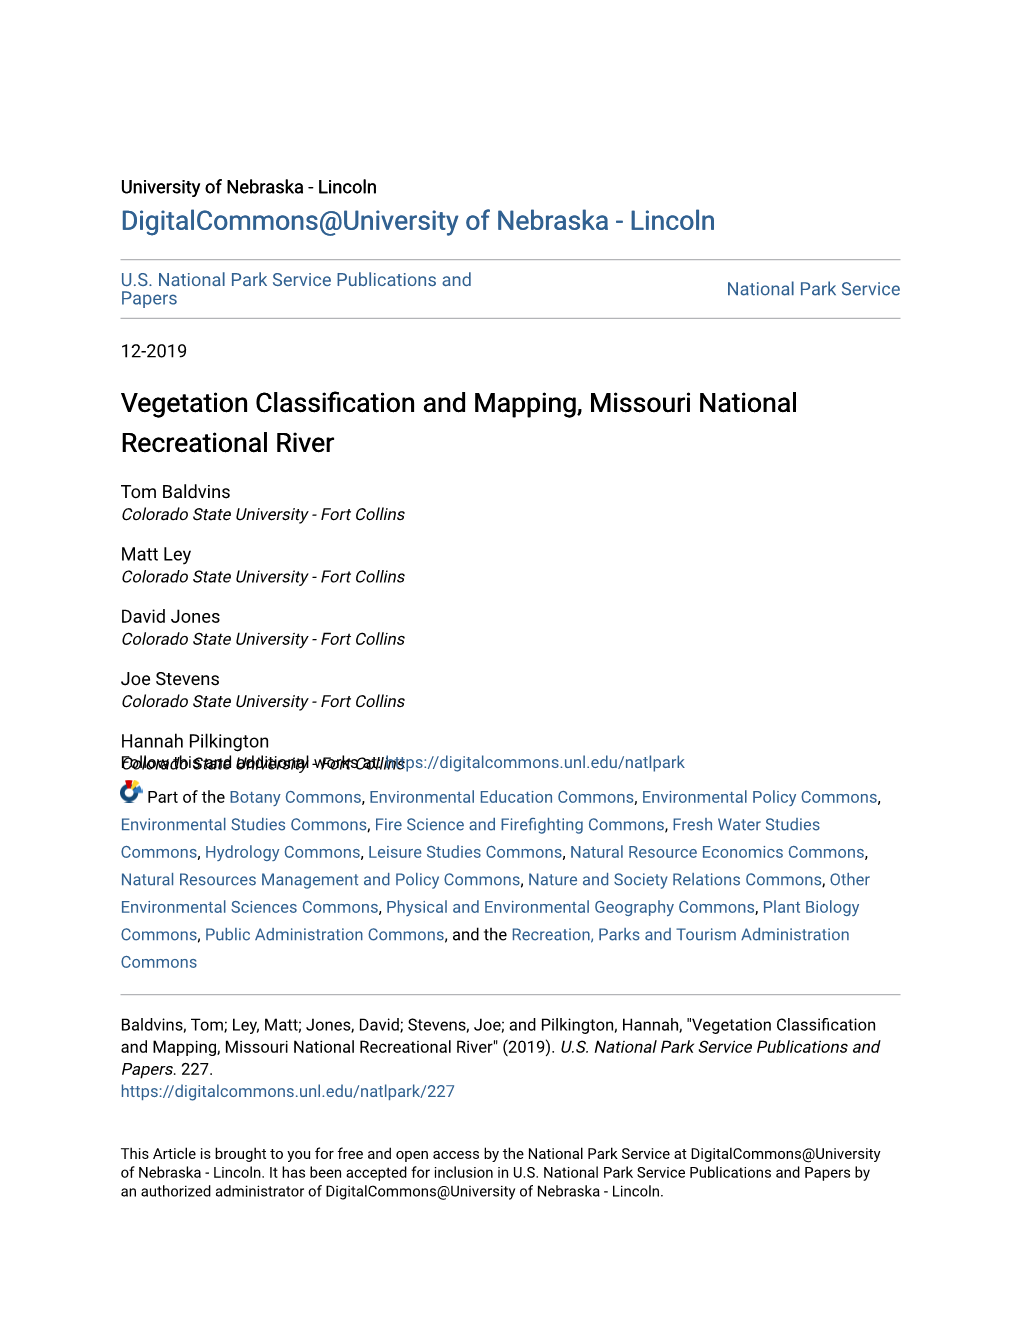 Vegetation Classification and Mapping, Missouri National Recreational River